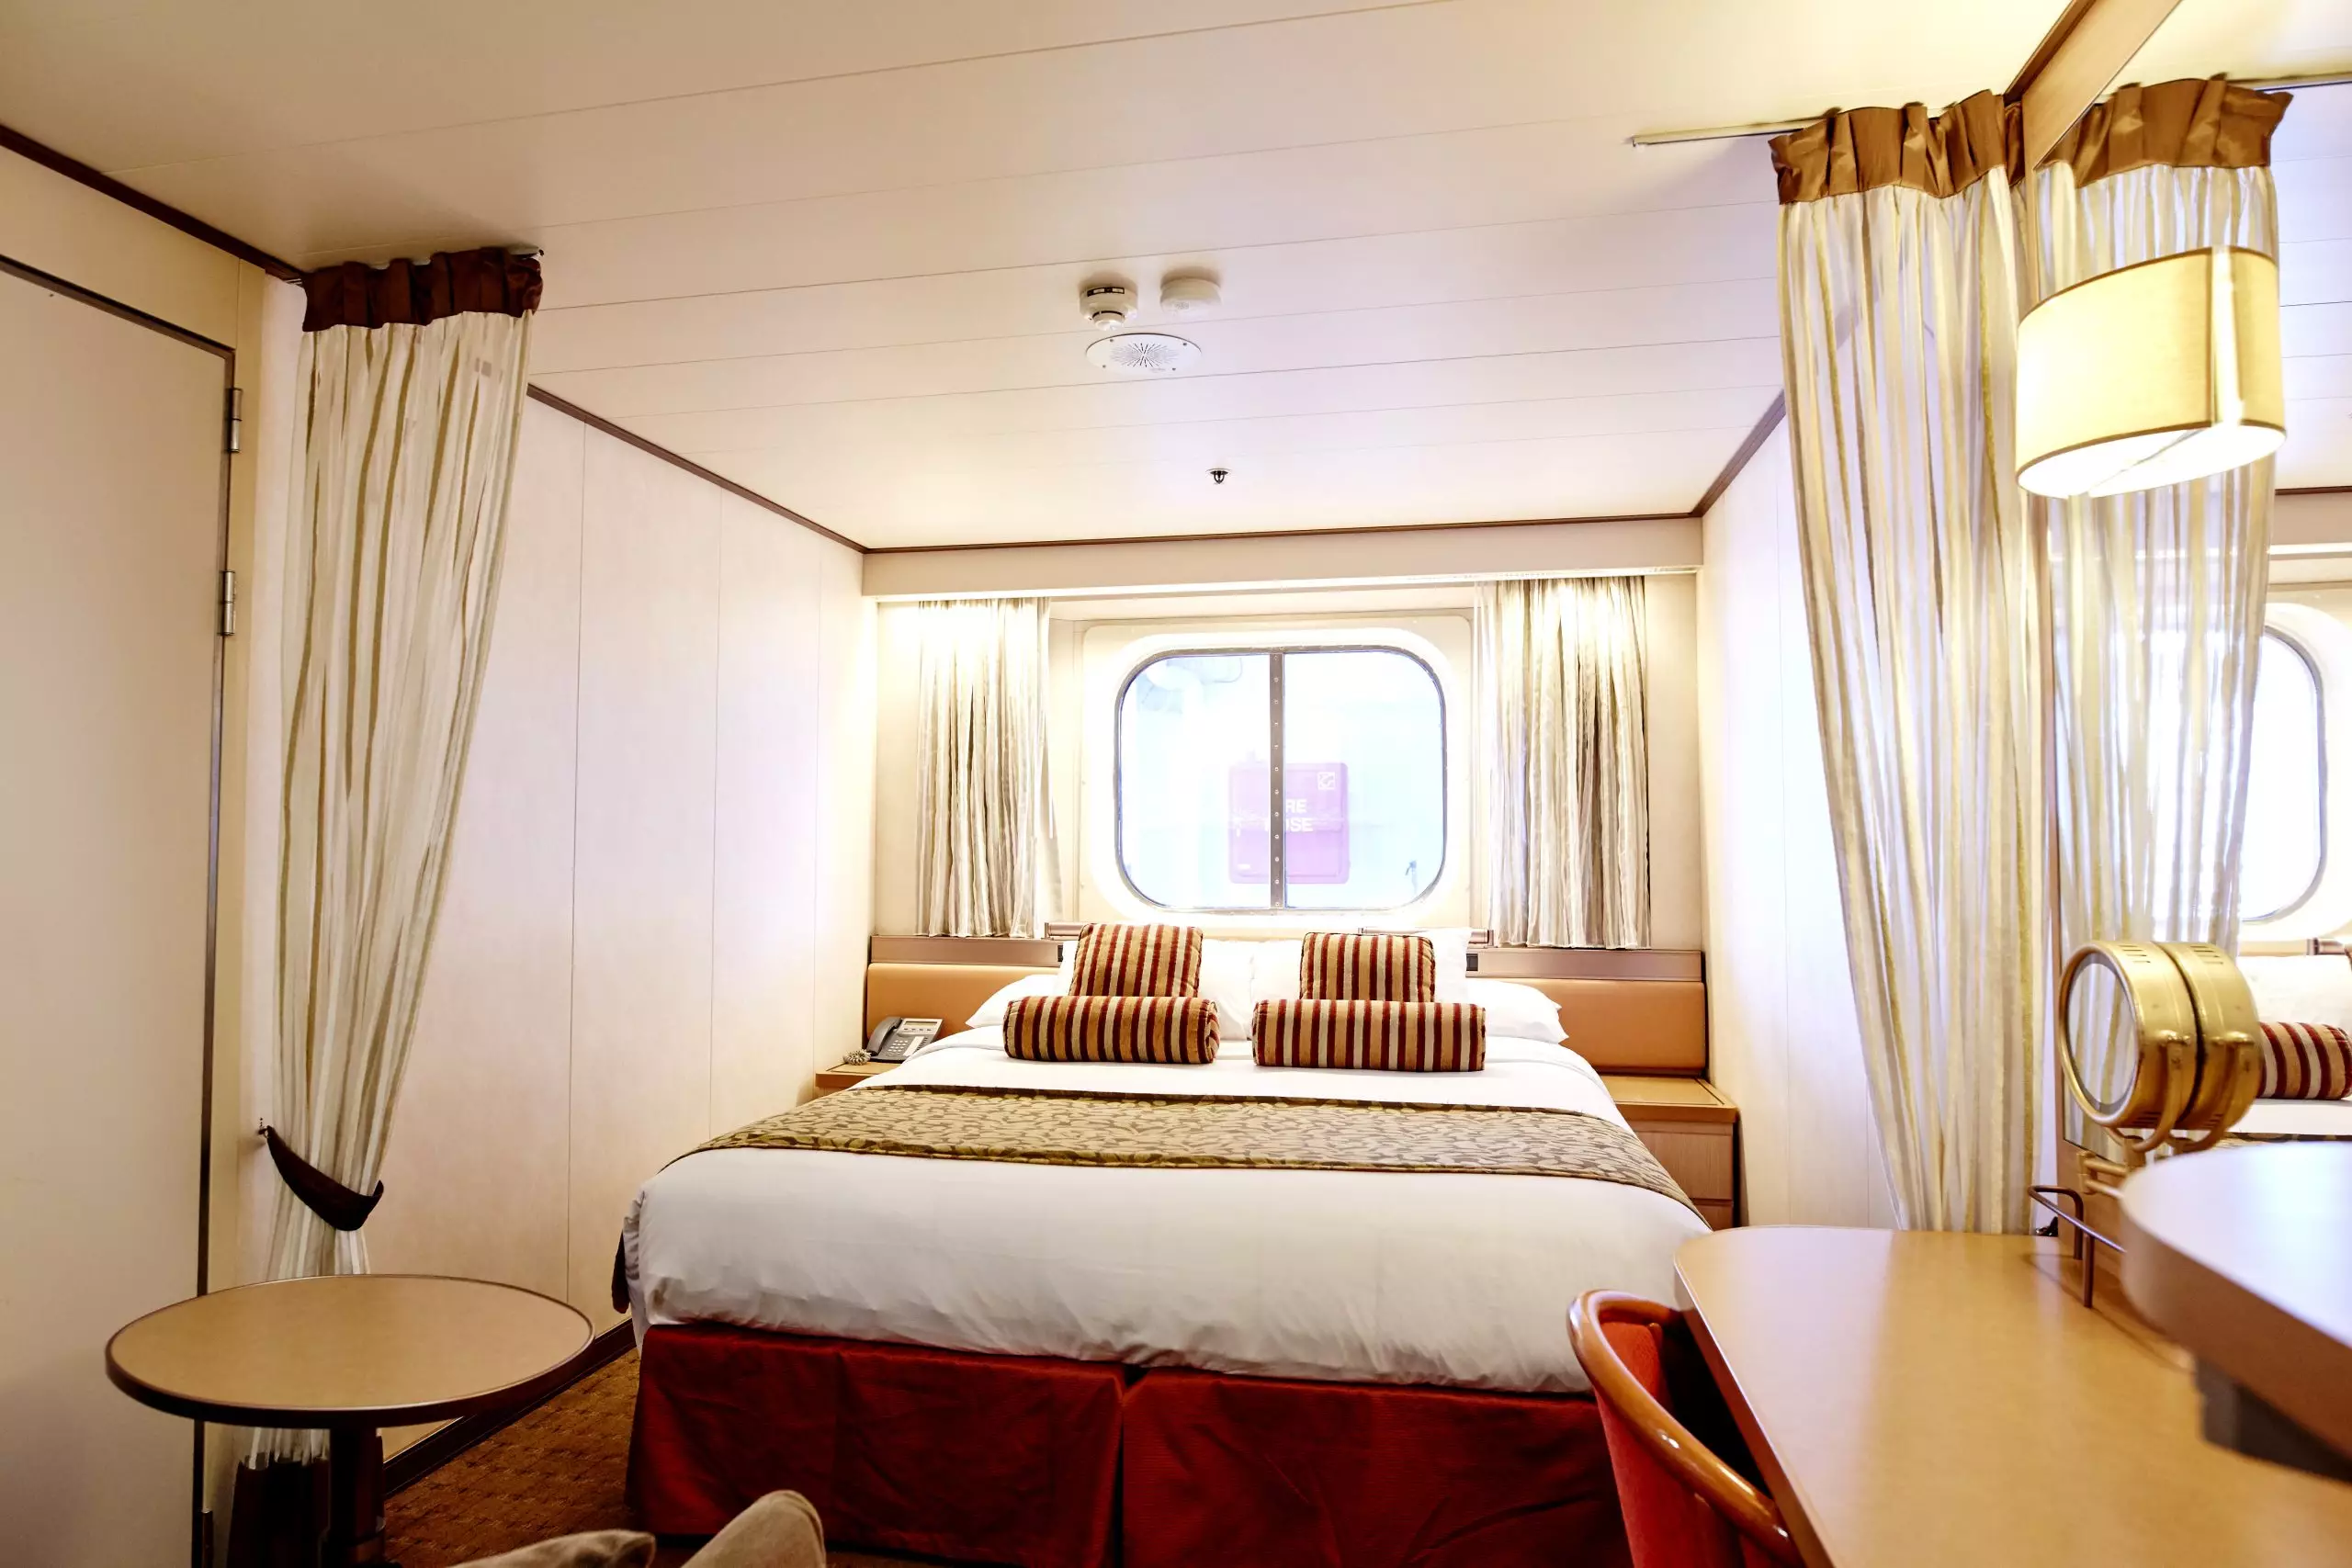 Journey Ship XBO obstructed view Deck 6 double bed